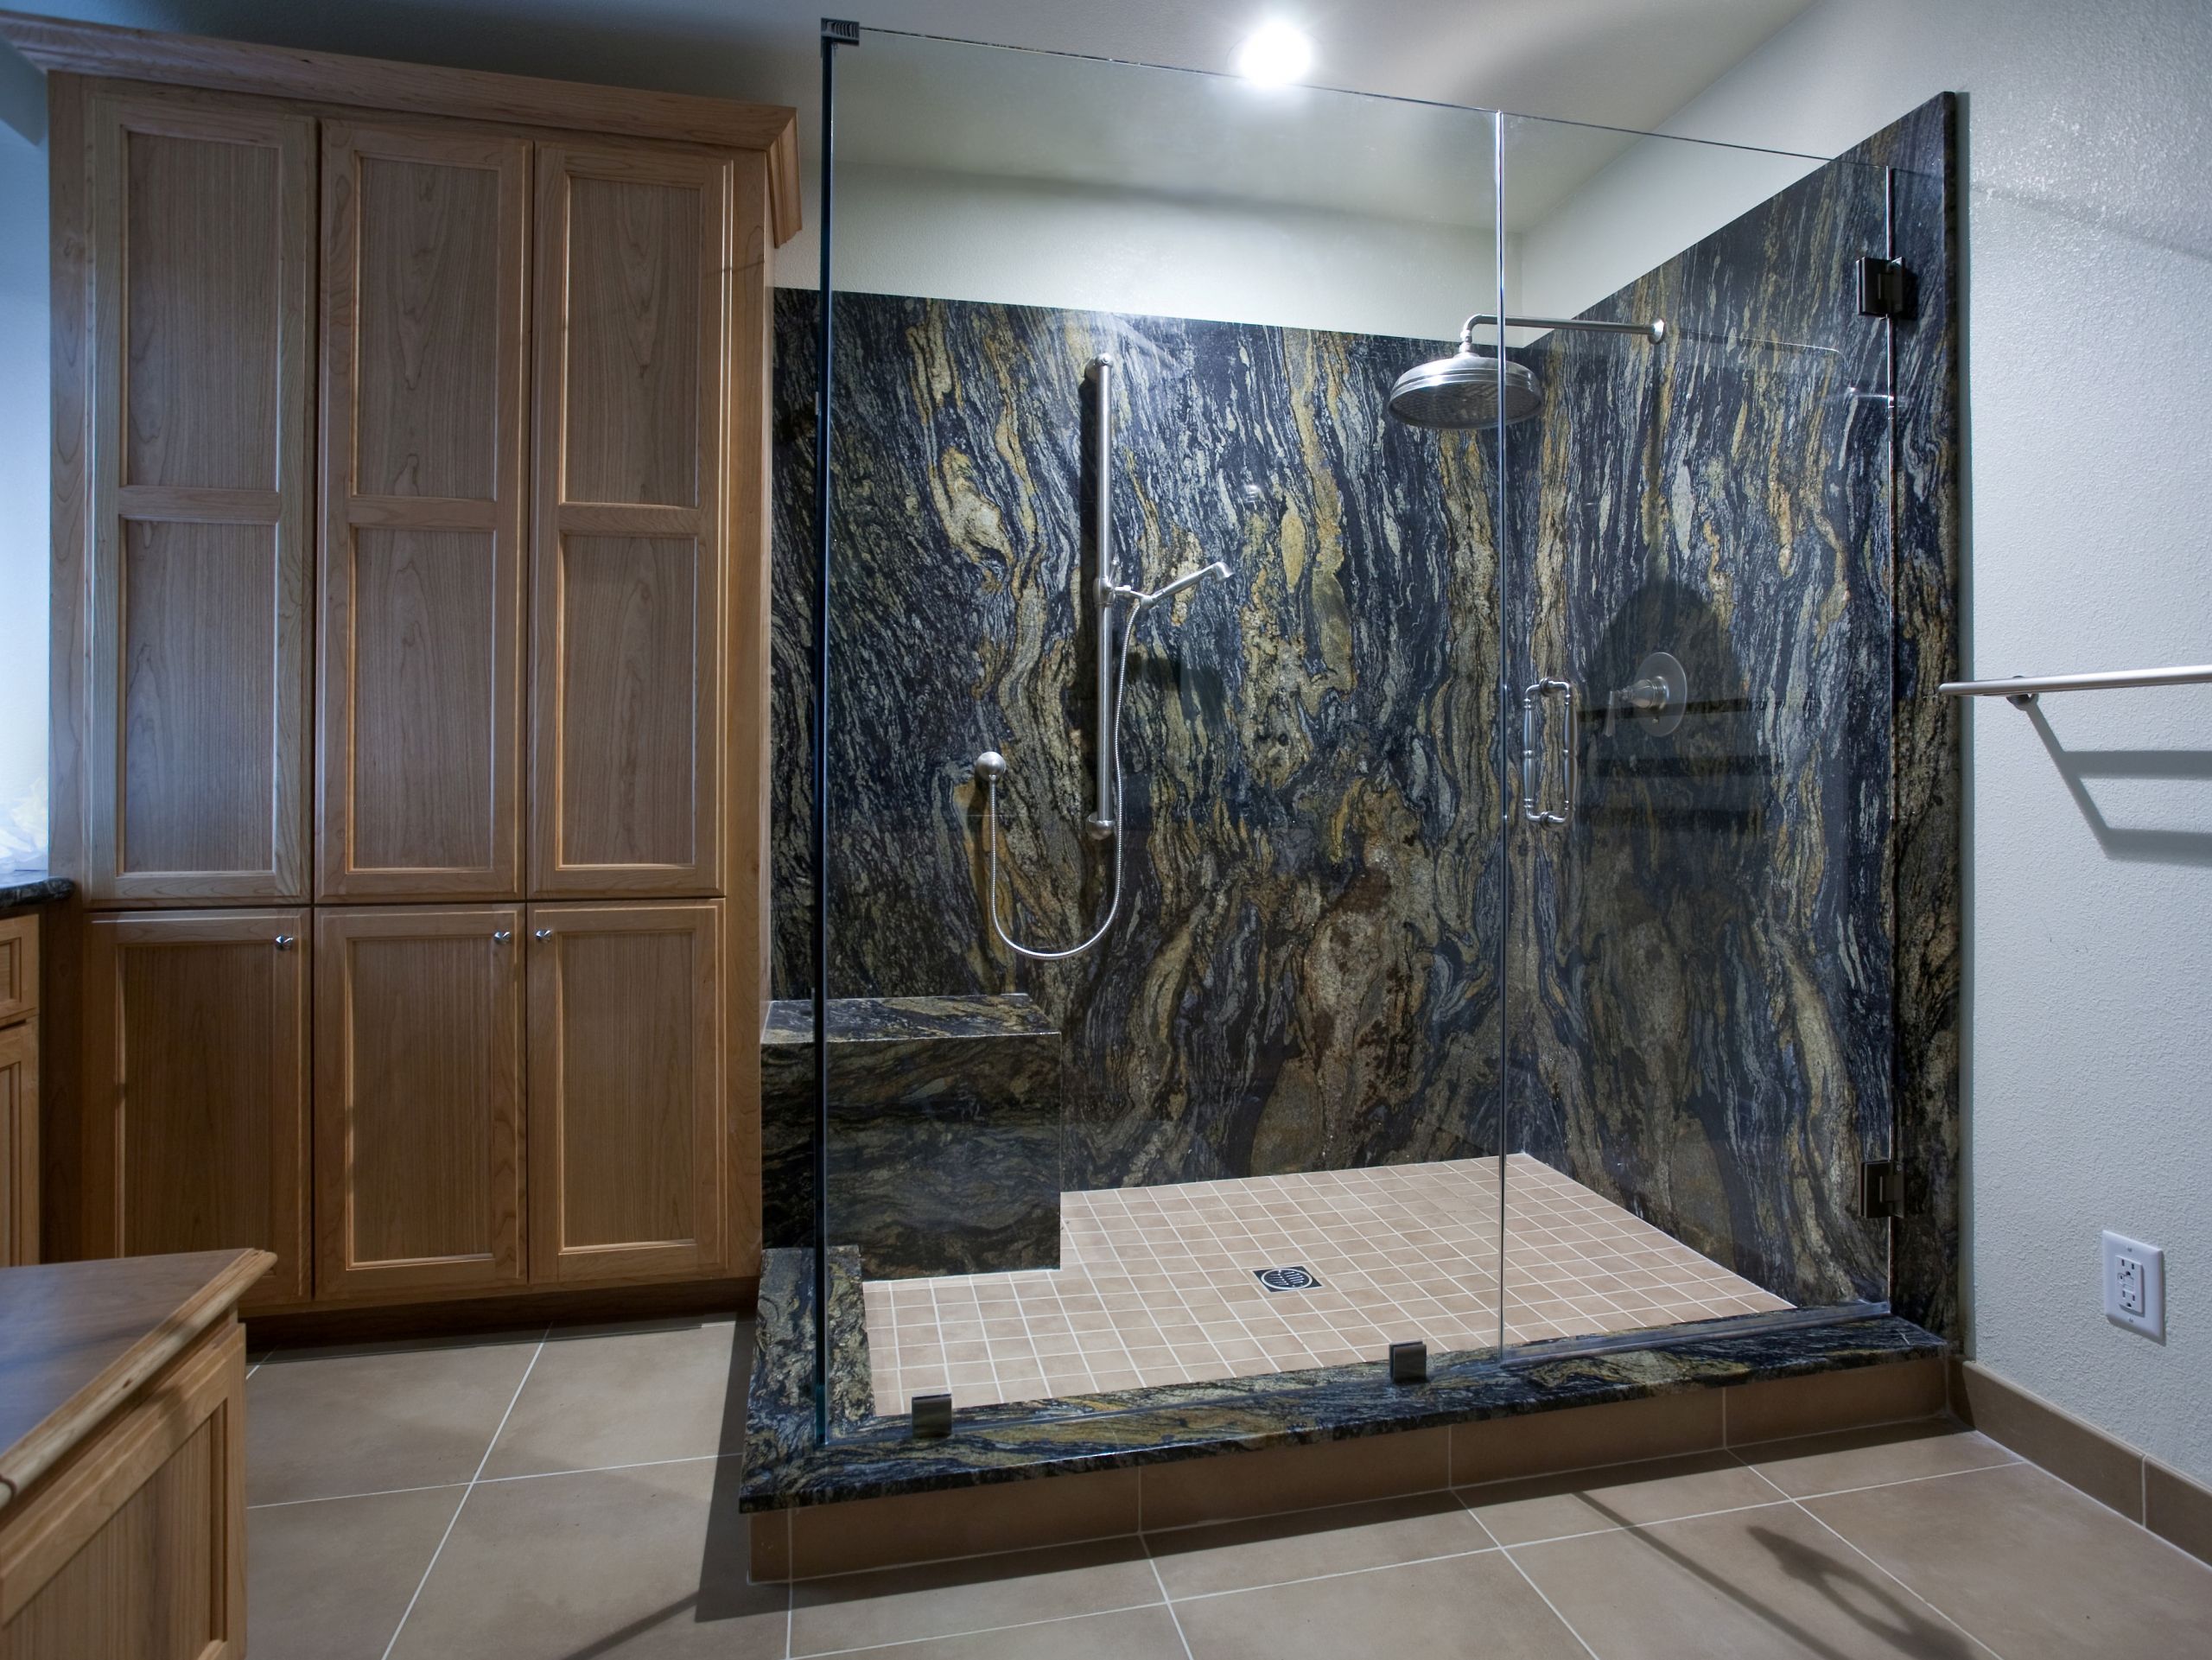 Cost Of Remodeling A Bathroom
 How Much Does a Bathroom Remodel Cost Setting Realistic